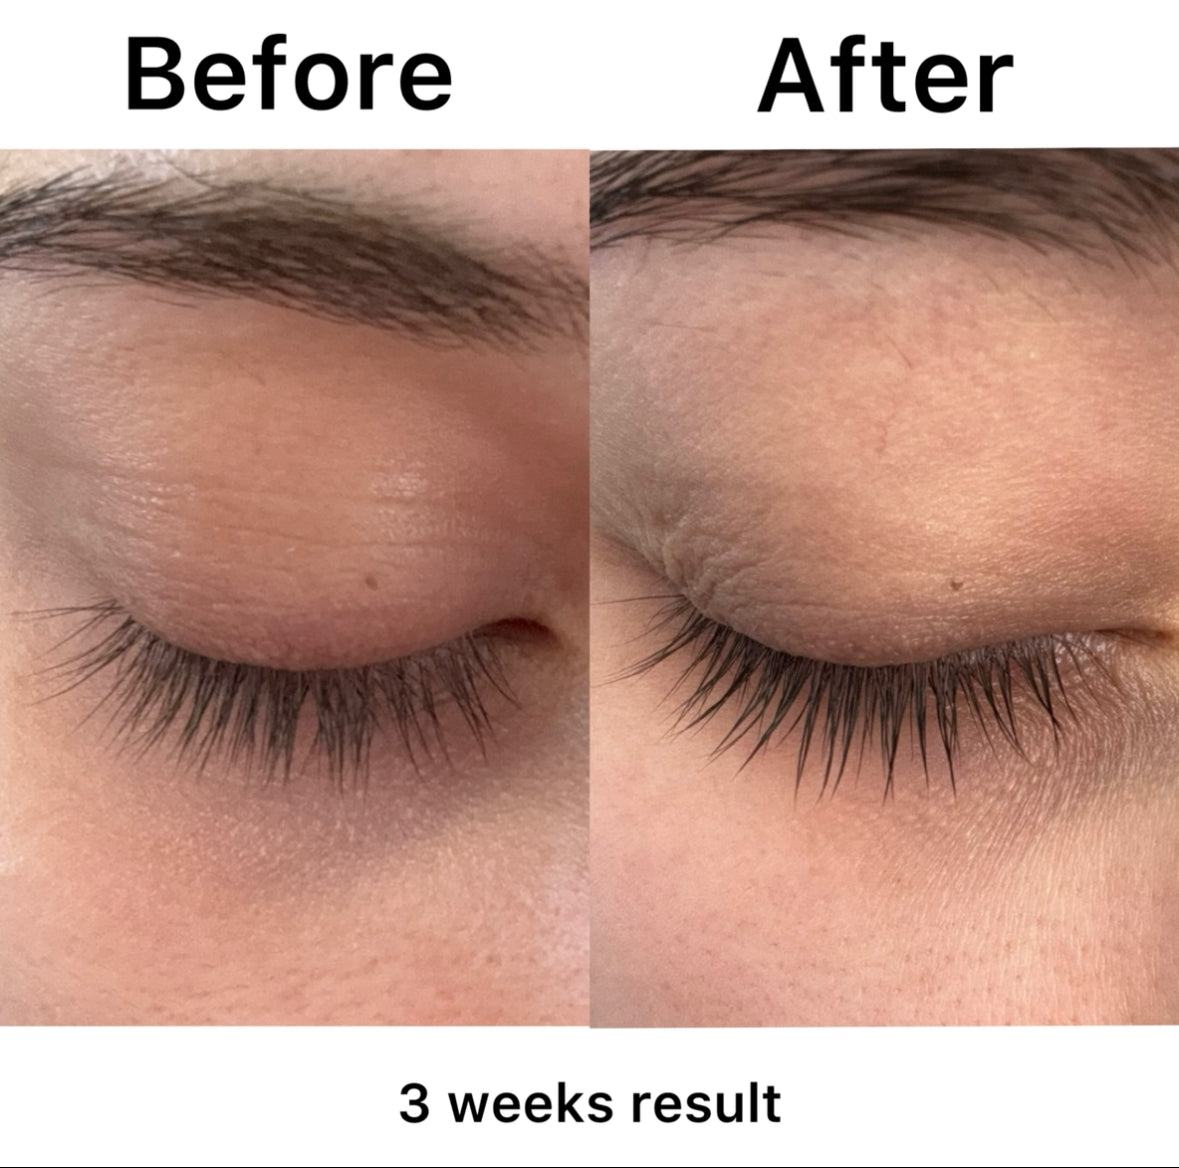 Lash & Brow Growth Serum - 100% Natural by Gafur Beauty